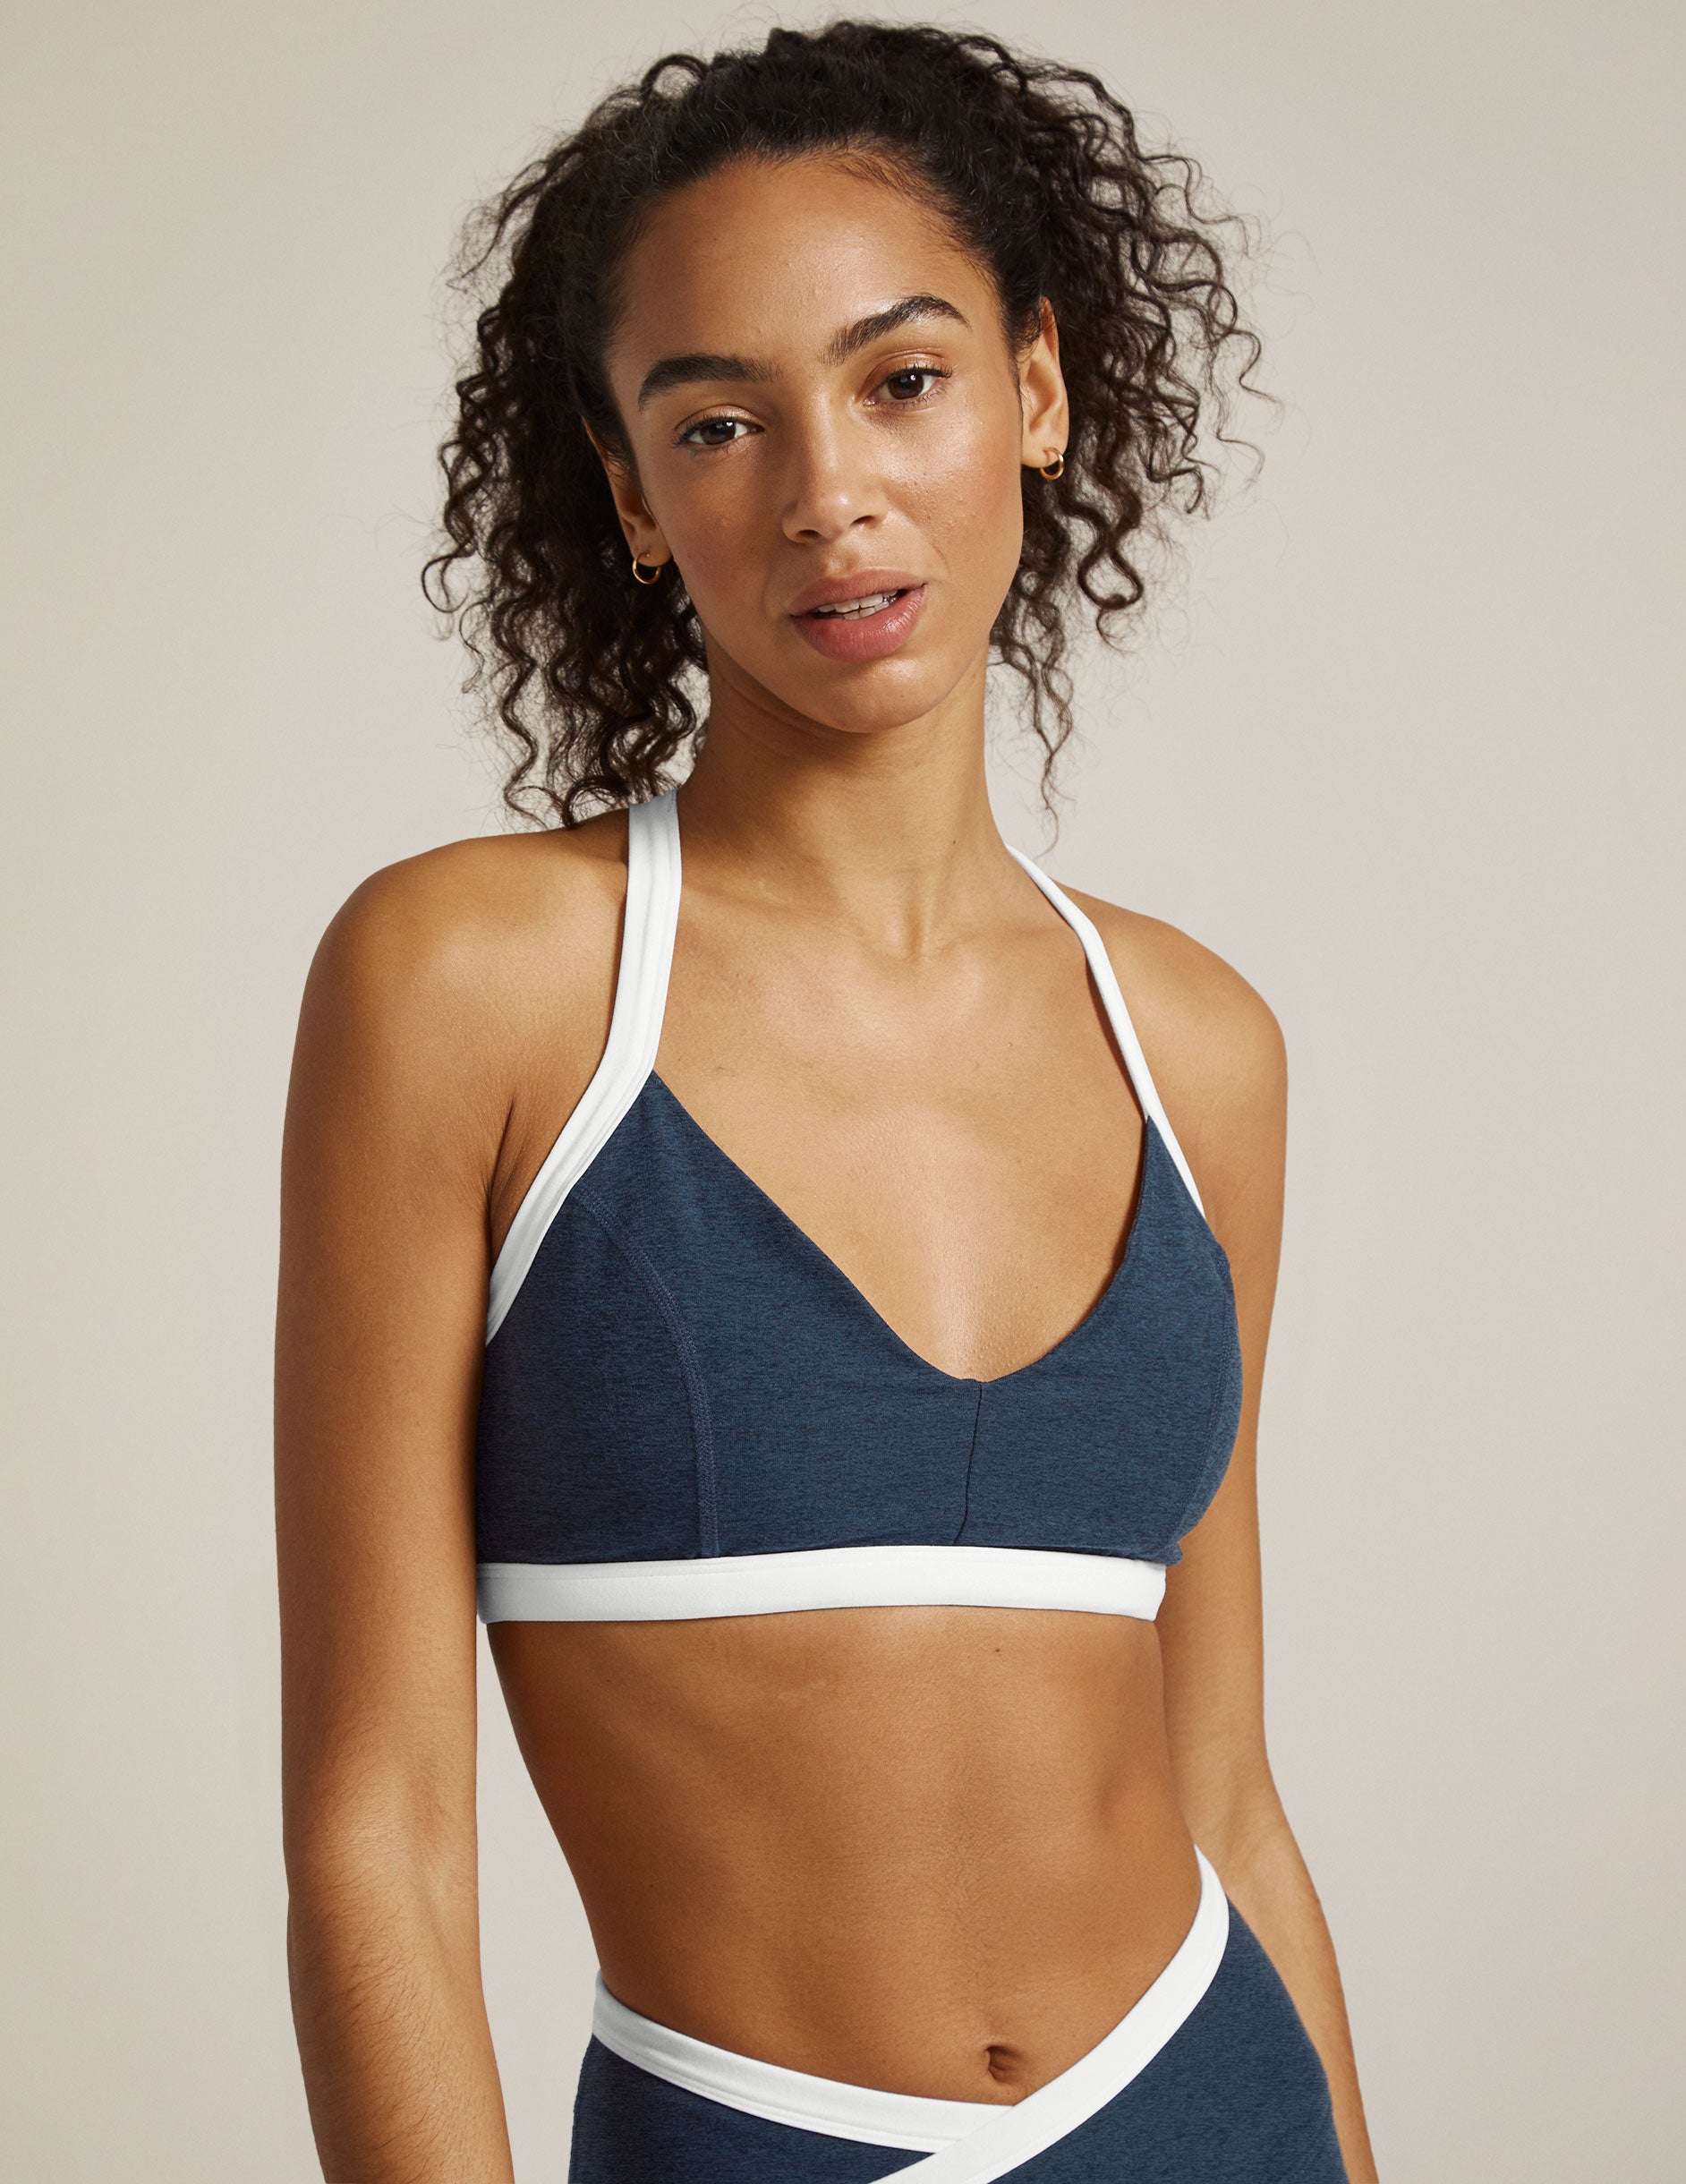 blue and white bra top